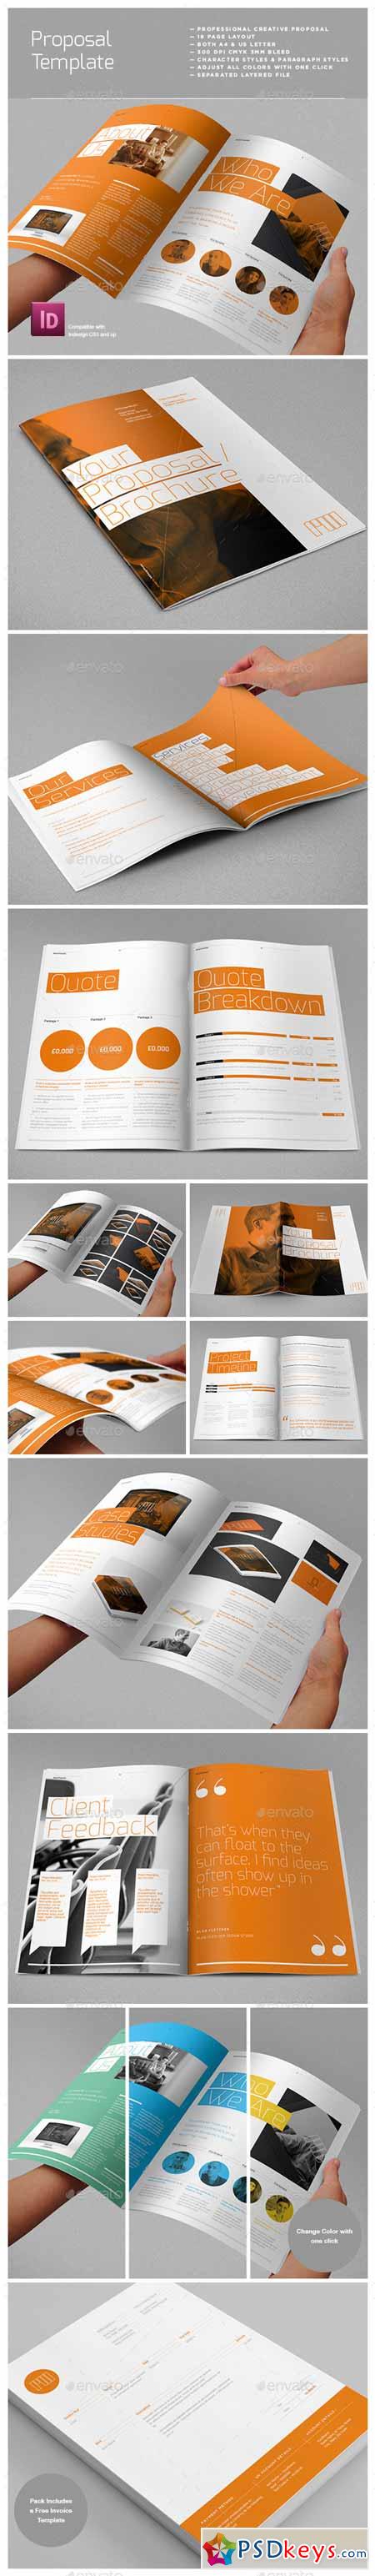 Agency Proposal Template 3771597